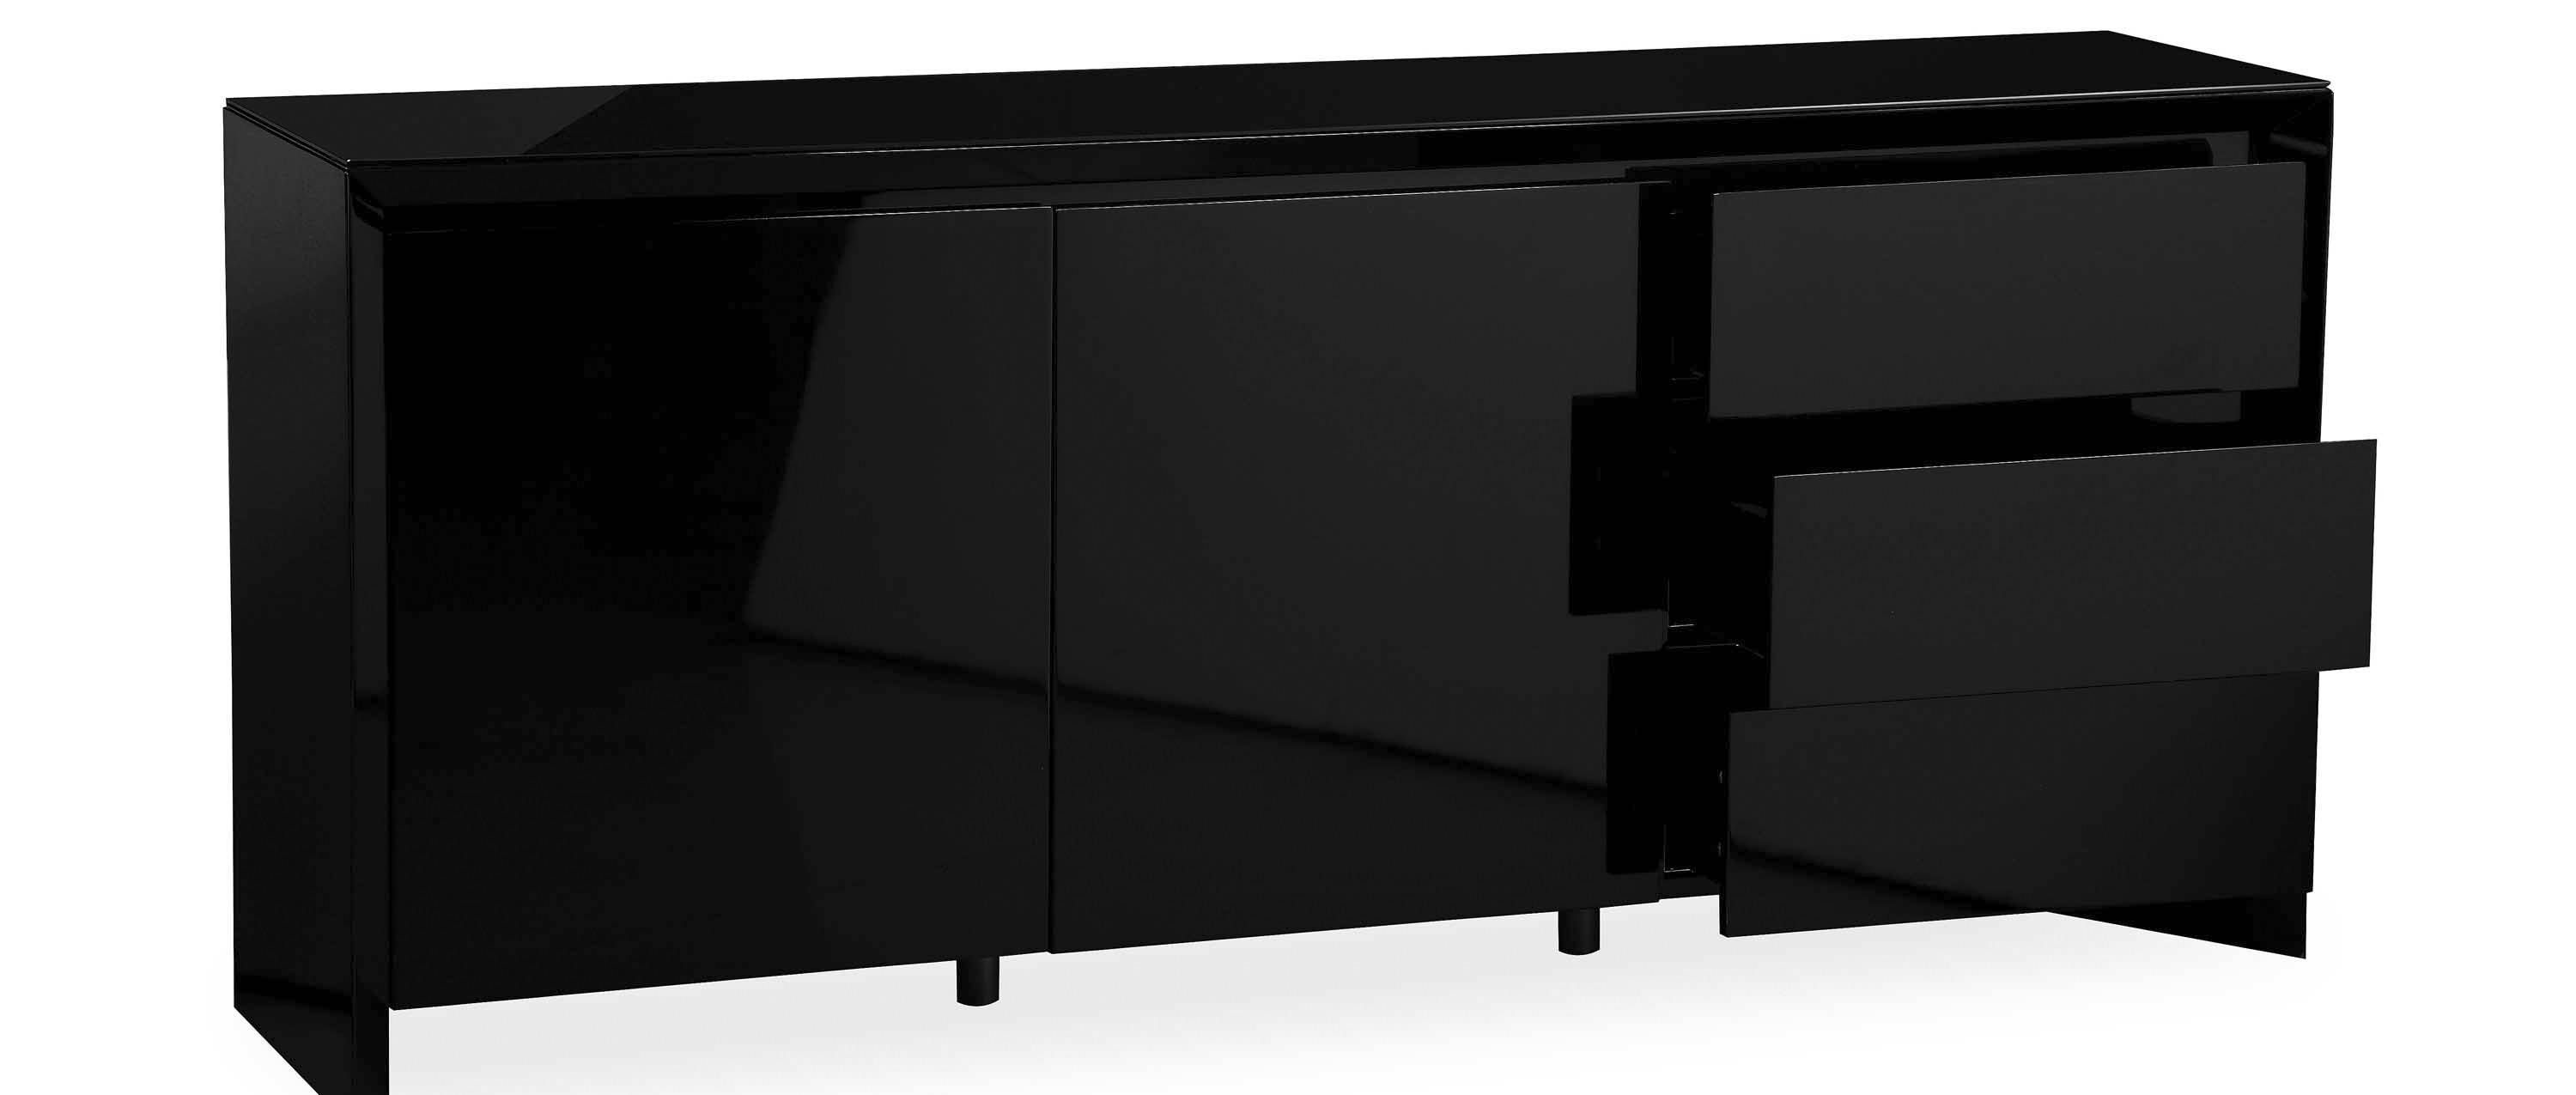 Featured Photo of 15 Collection of High Gloss Black Sideboards